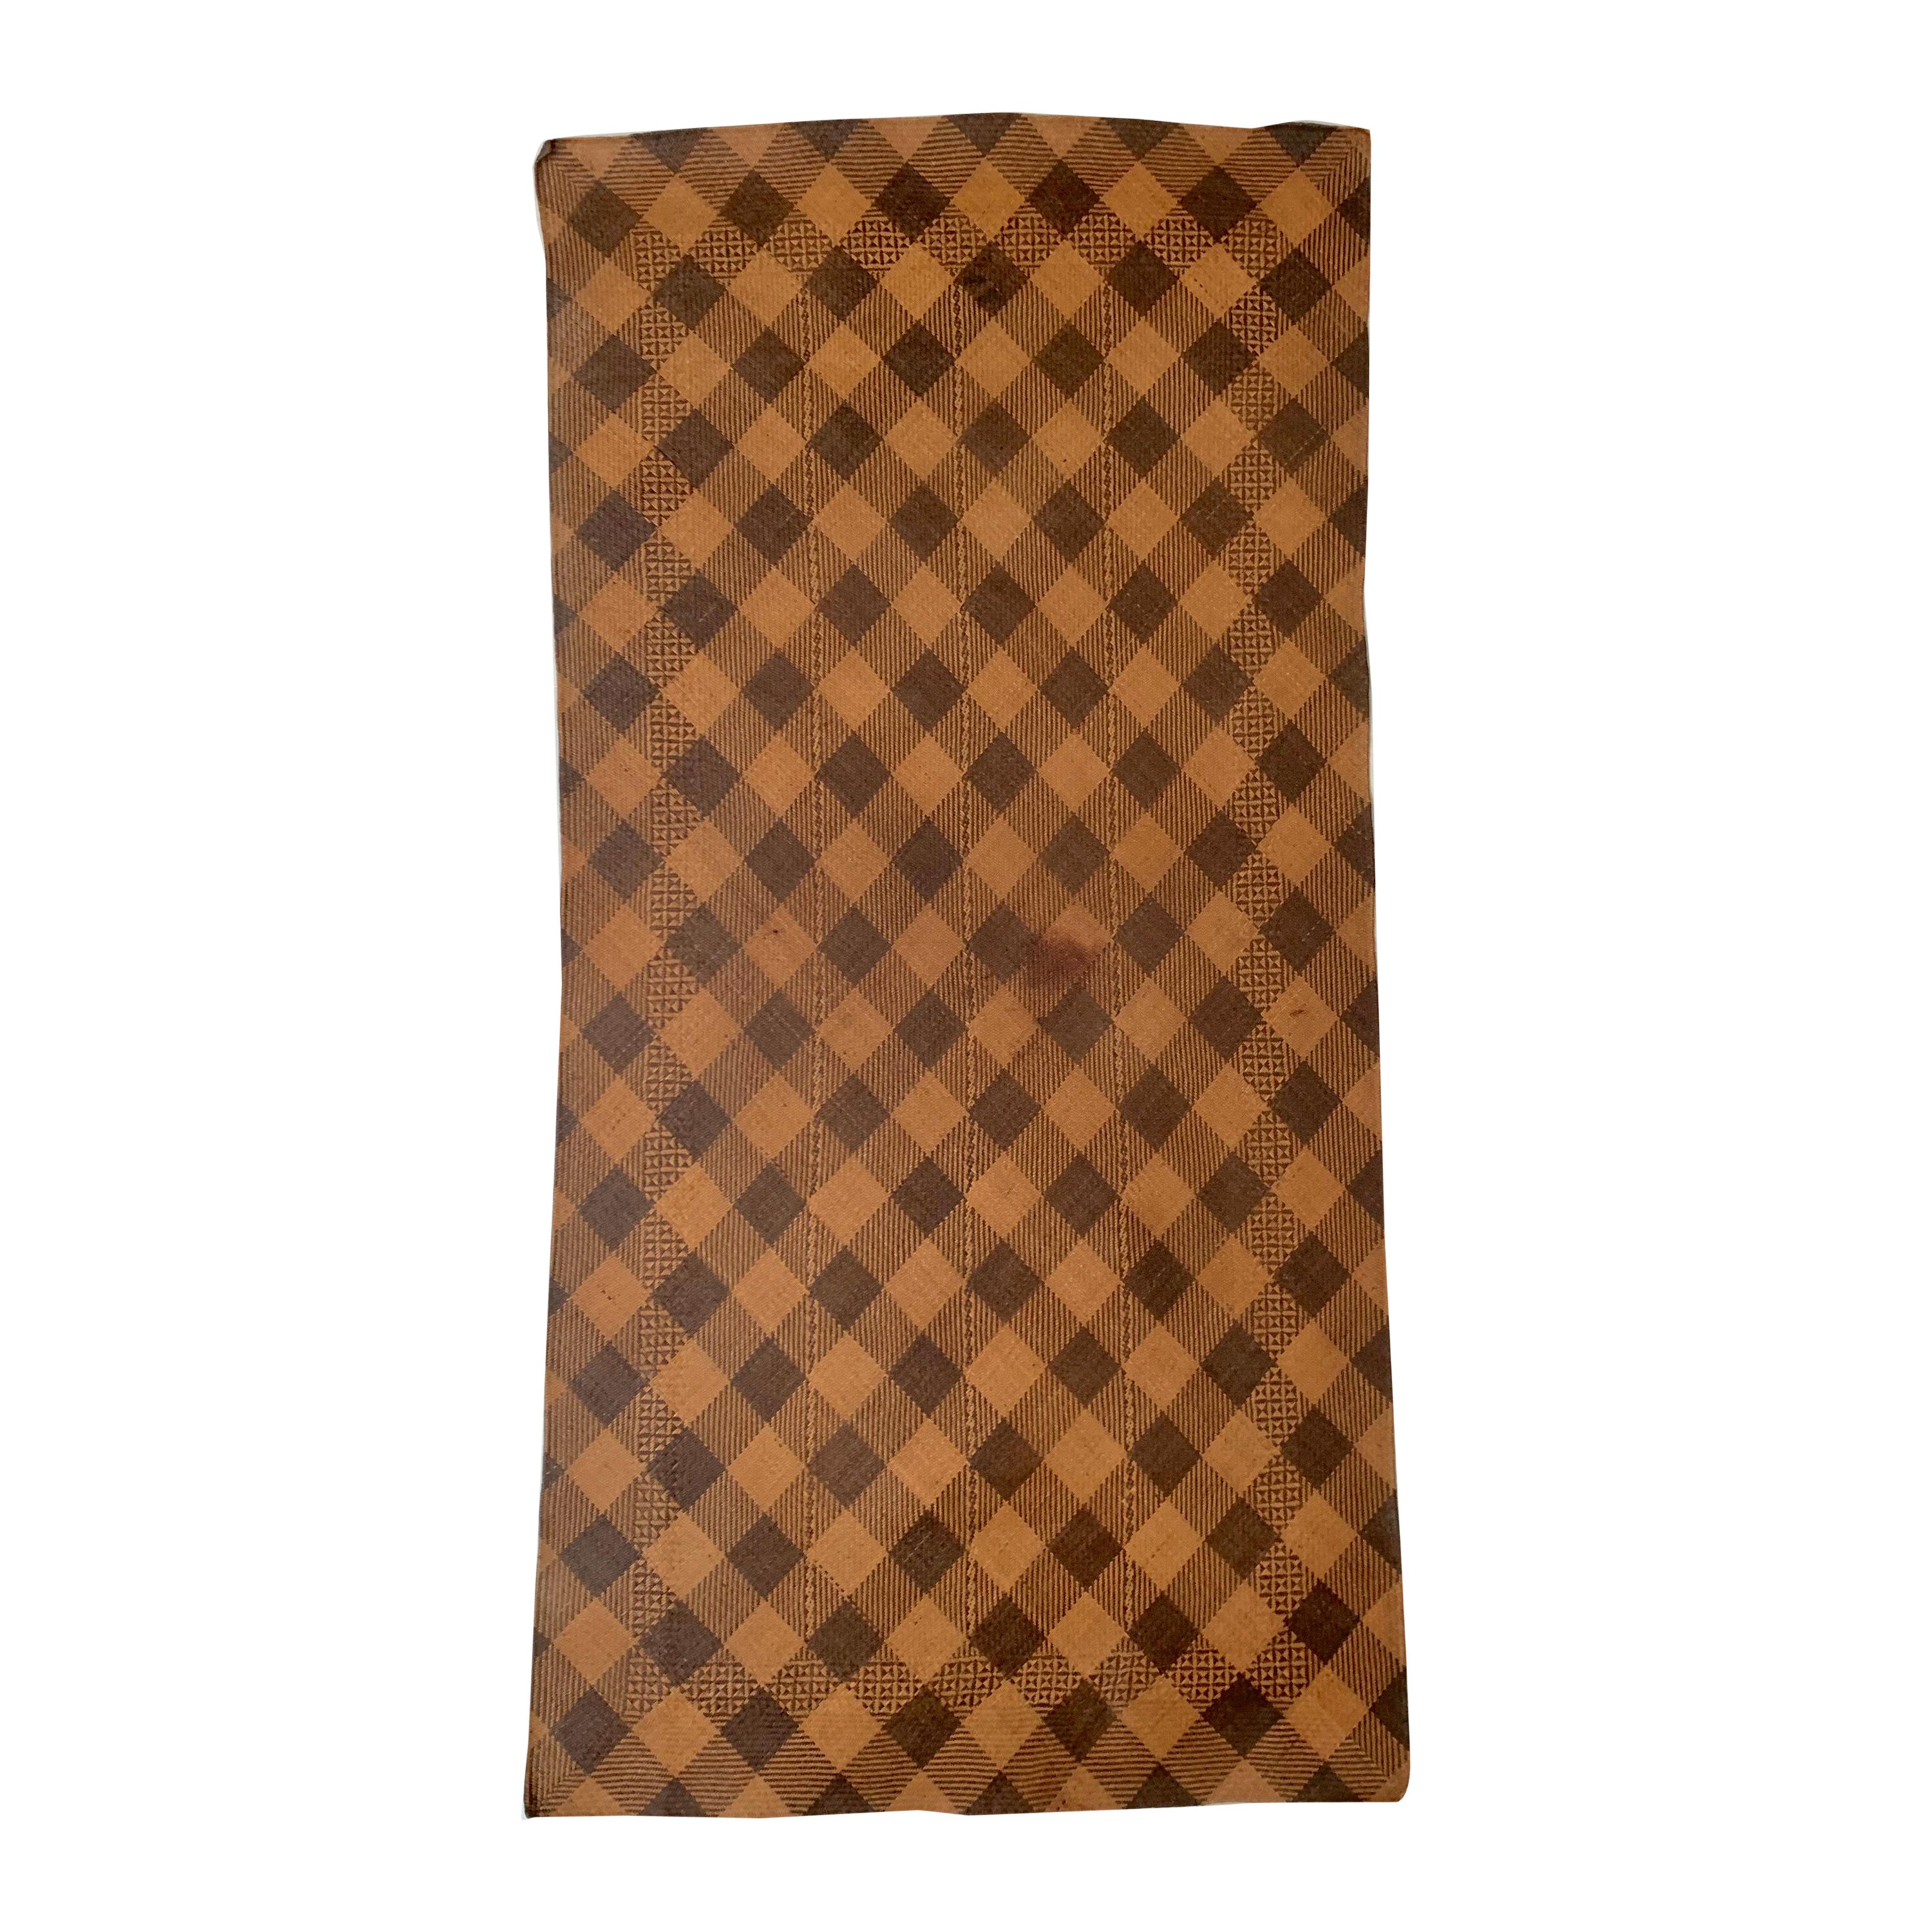 Dayak Tribe Mat with Checkered Motif, Kalimantan, Indonesia For Sale